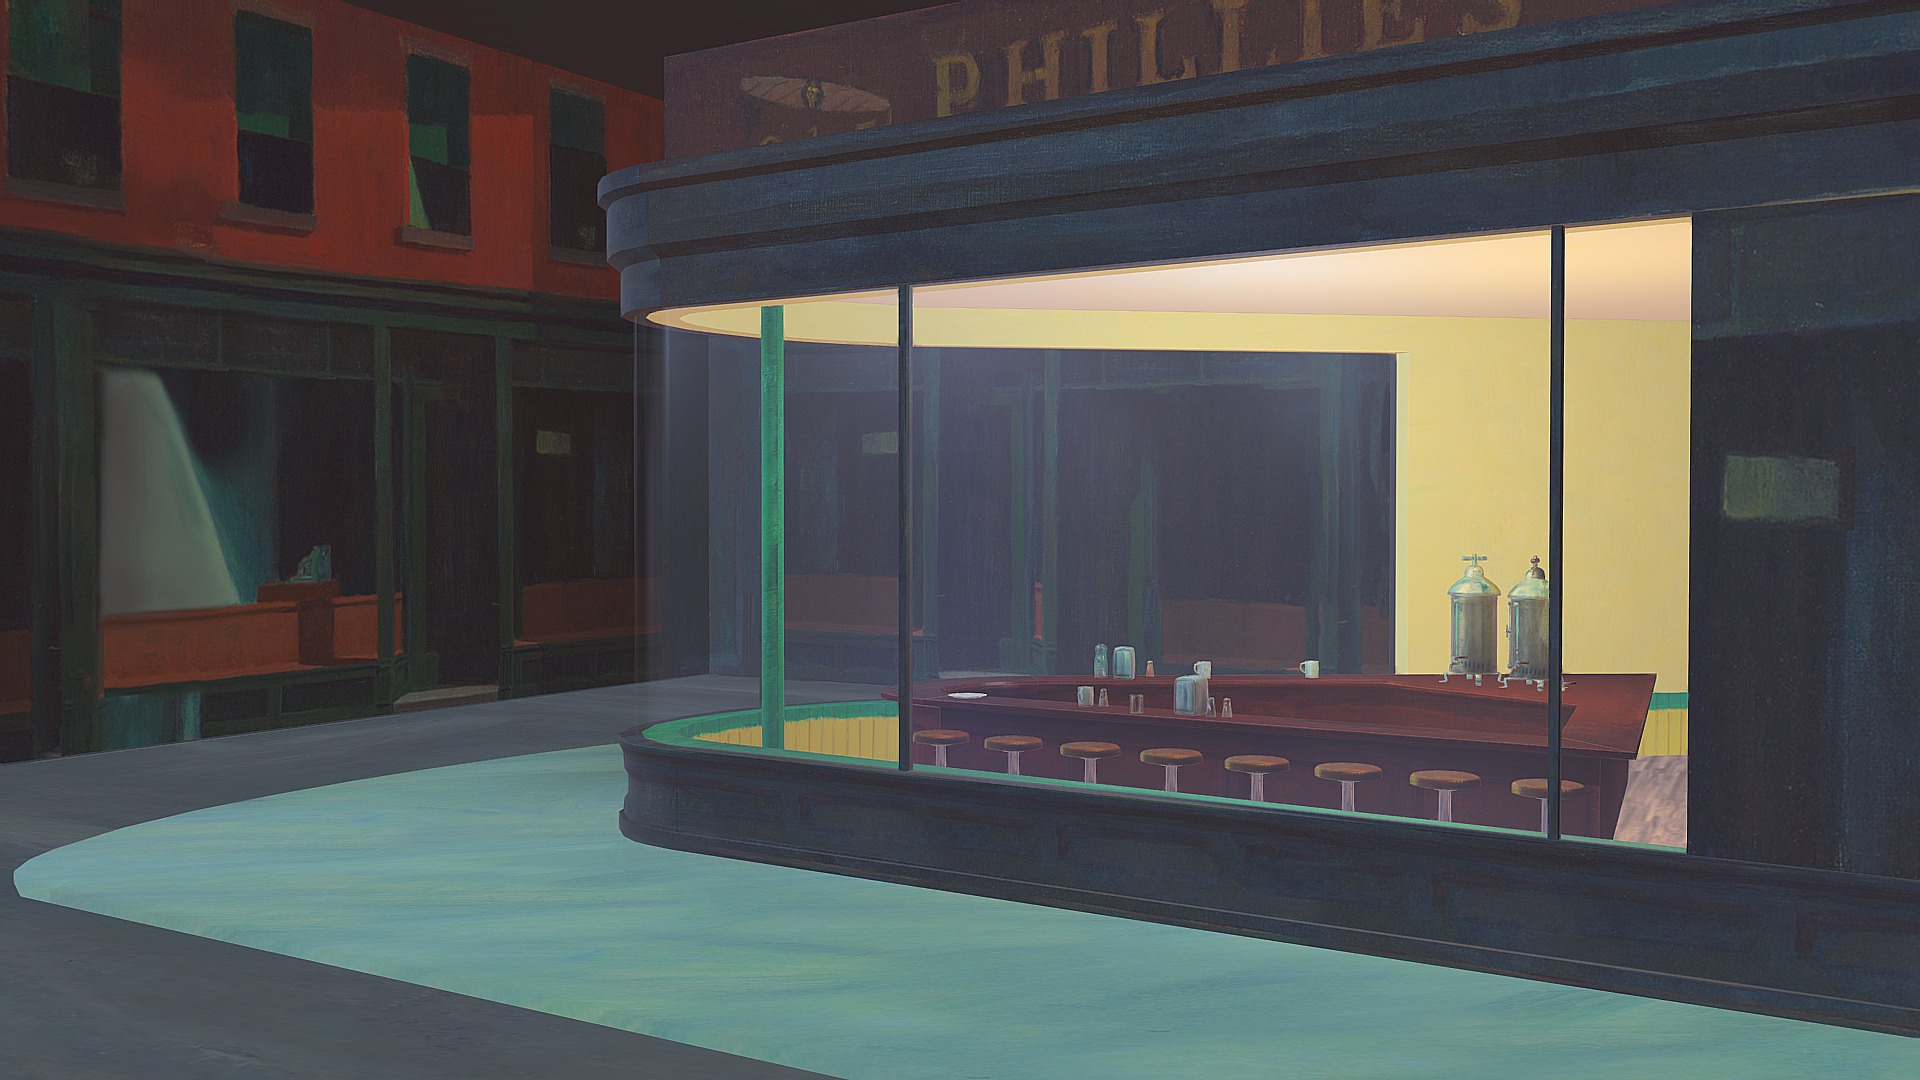 3D model NightHawks by Edward Hopper 1942 - This is a 3D model of the NightHawks by Edward Hopper 1942. The 3D model is about a pool in a building.